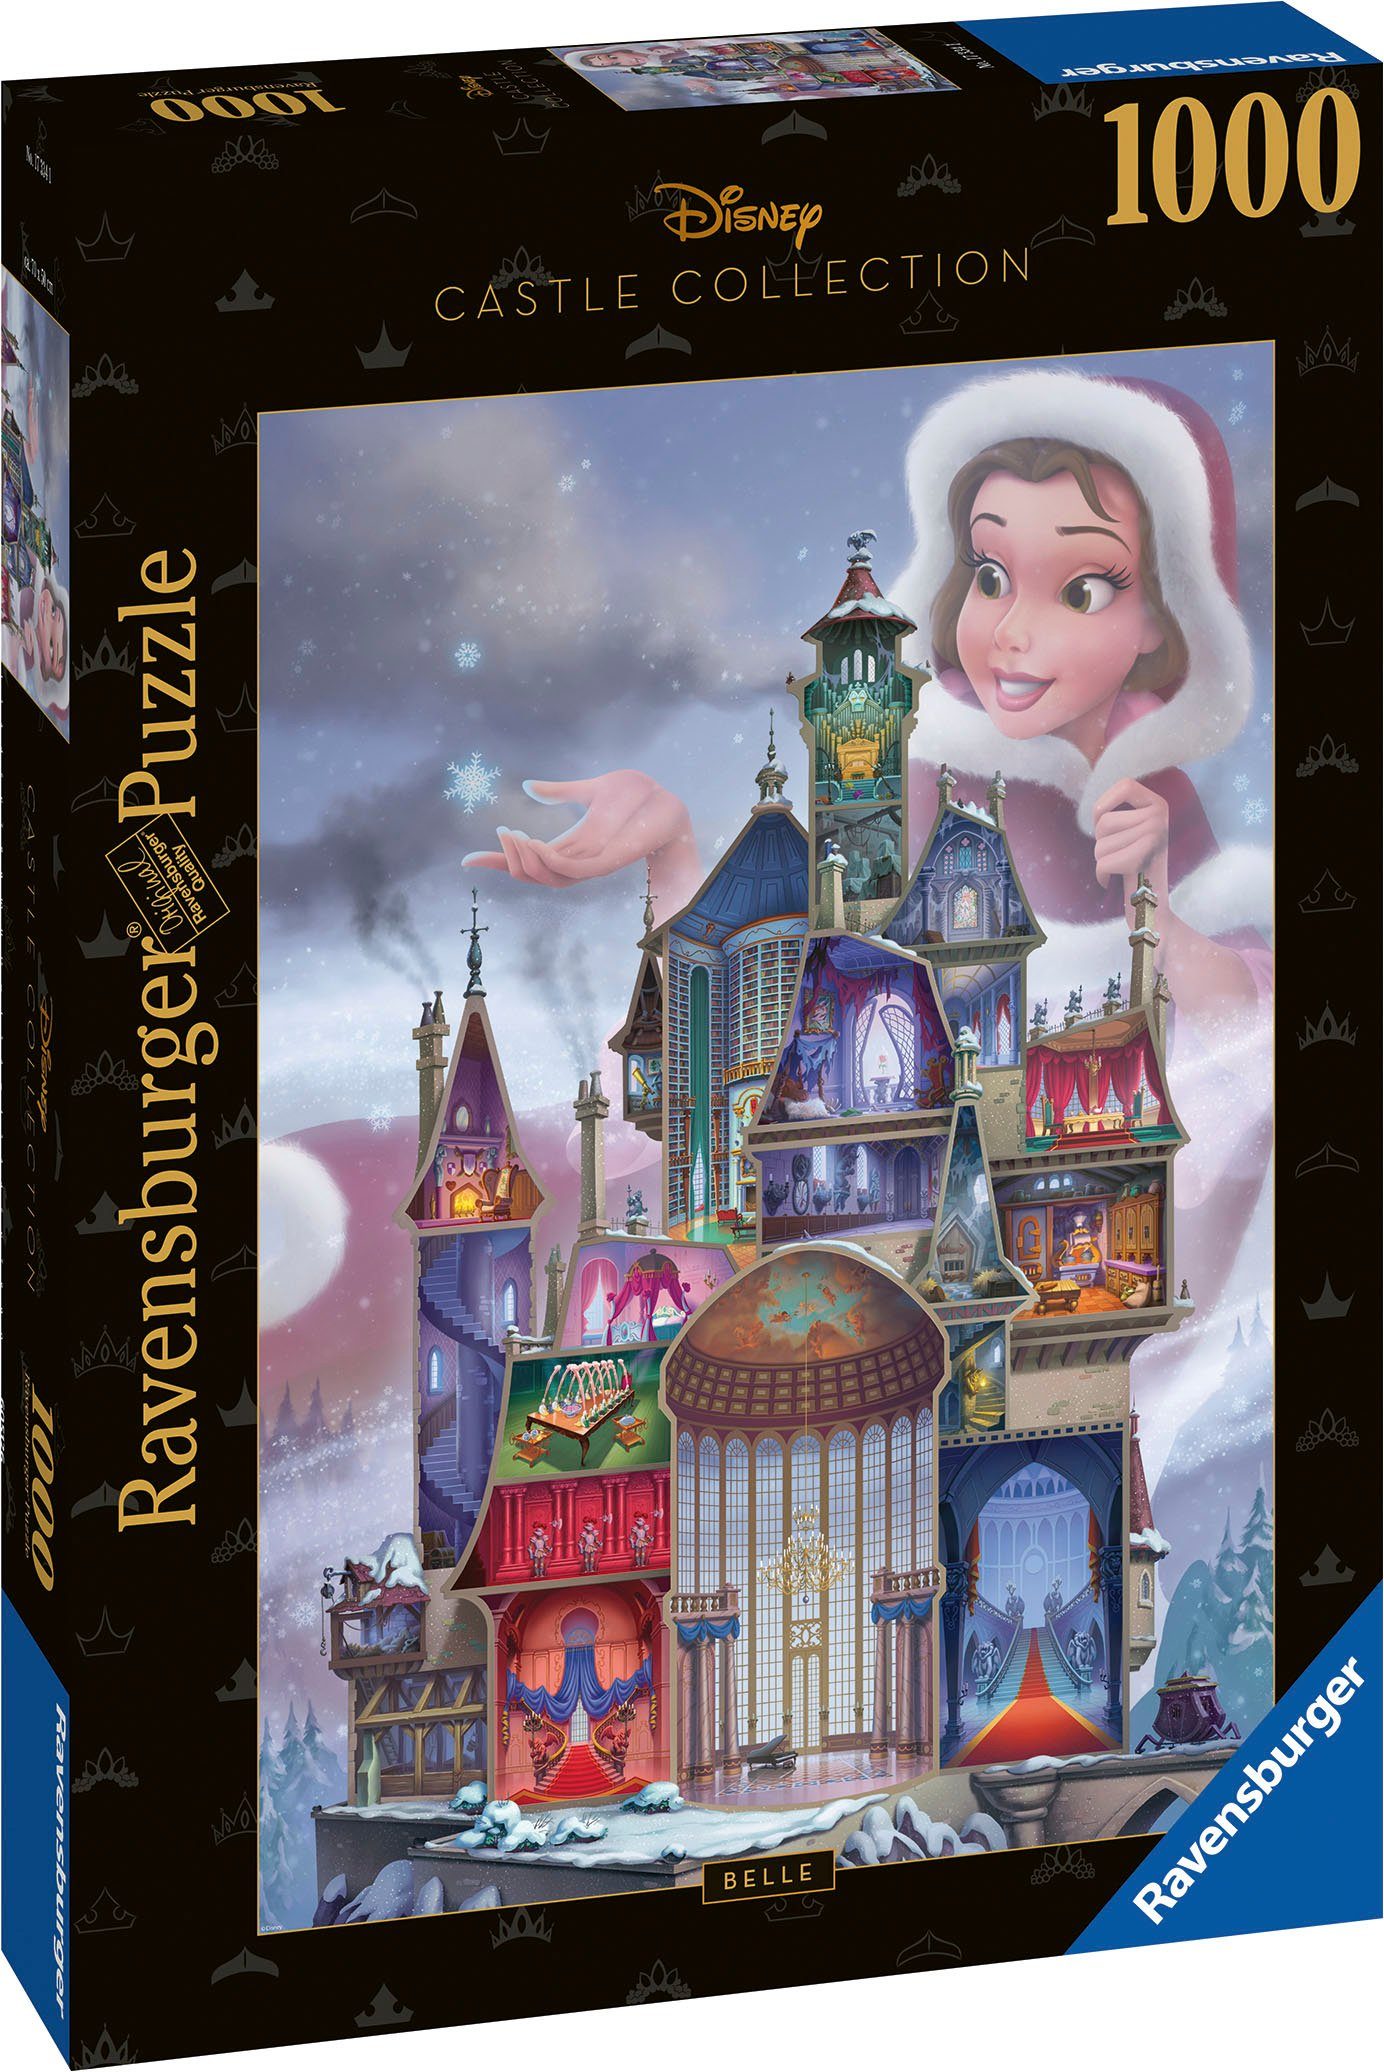 in 1000 Belle, Disney Made Castle Puzzleteile, Ravensburger Germany Puzzle Collection,